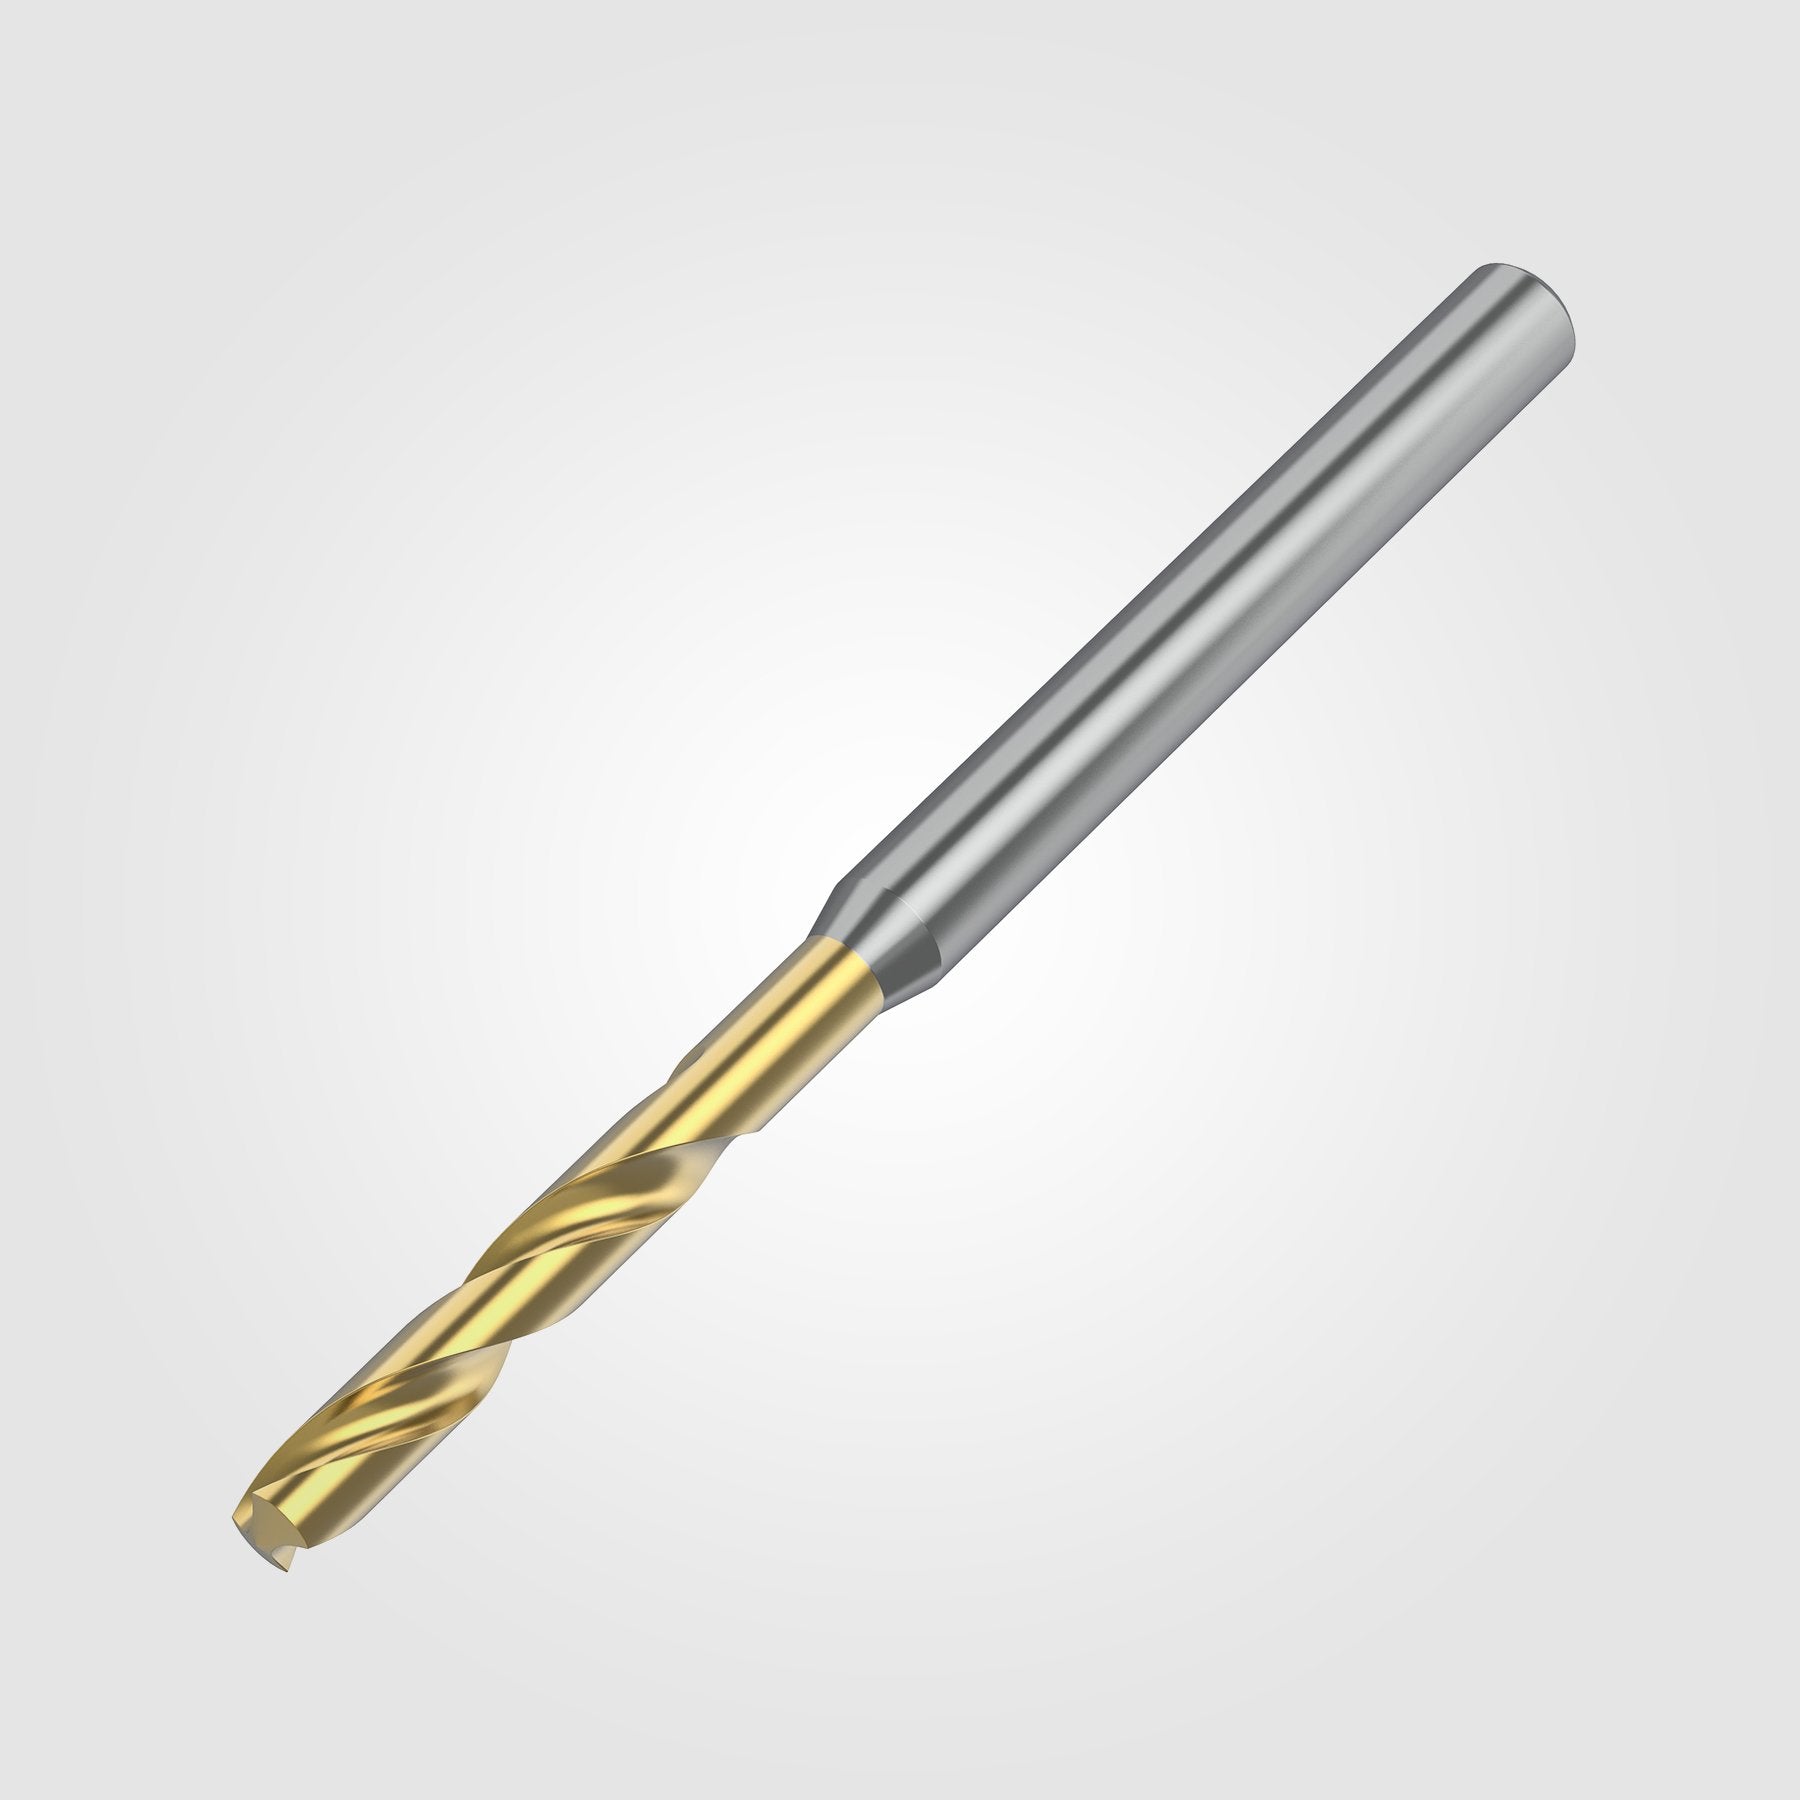 GOdrill (THROUGH COOLANT) | 8.8mm / .3465" / 3xD | SOLID CARBIDE DRILL | 4151186